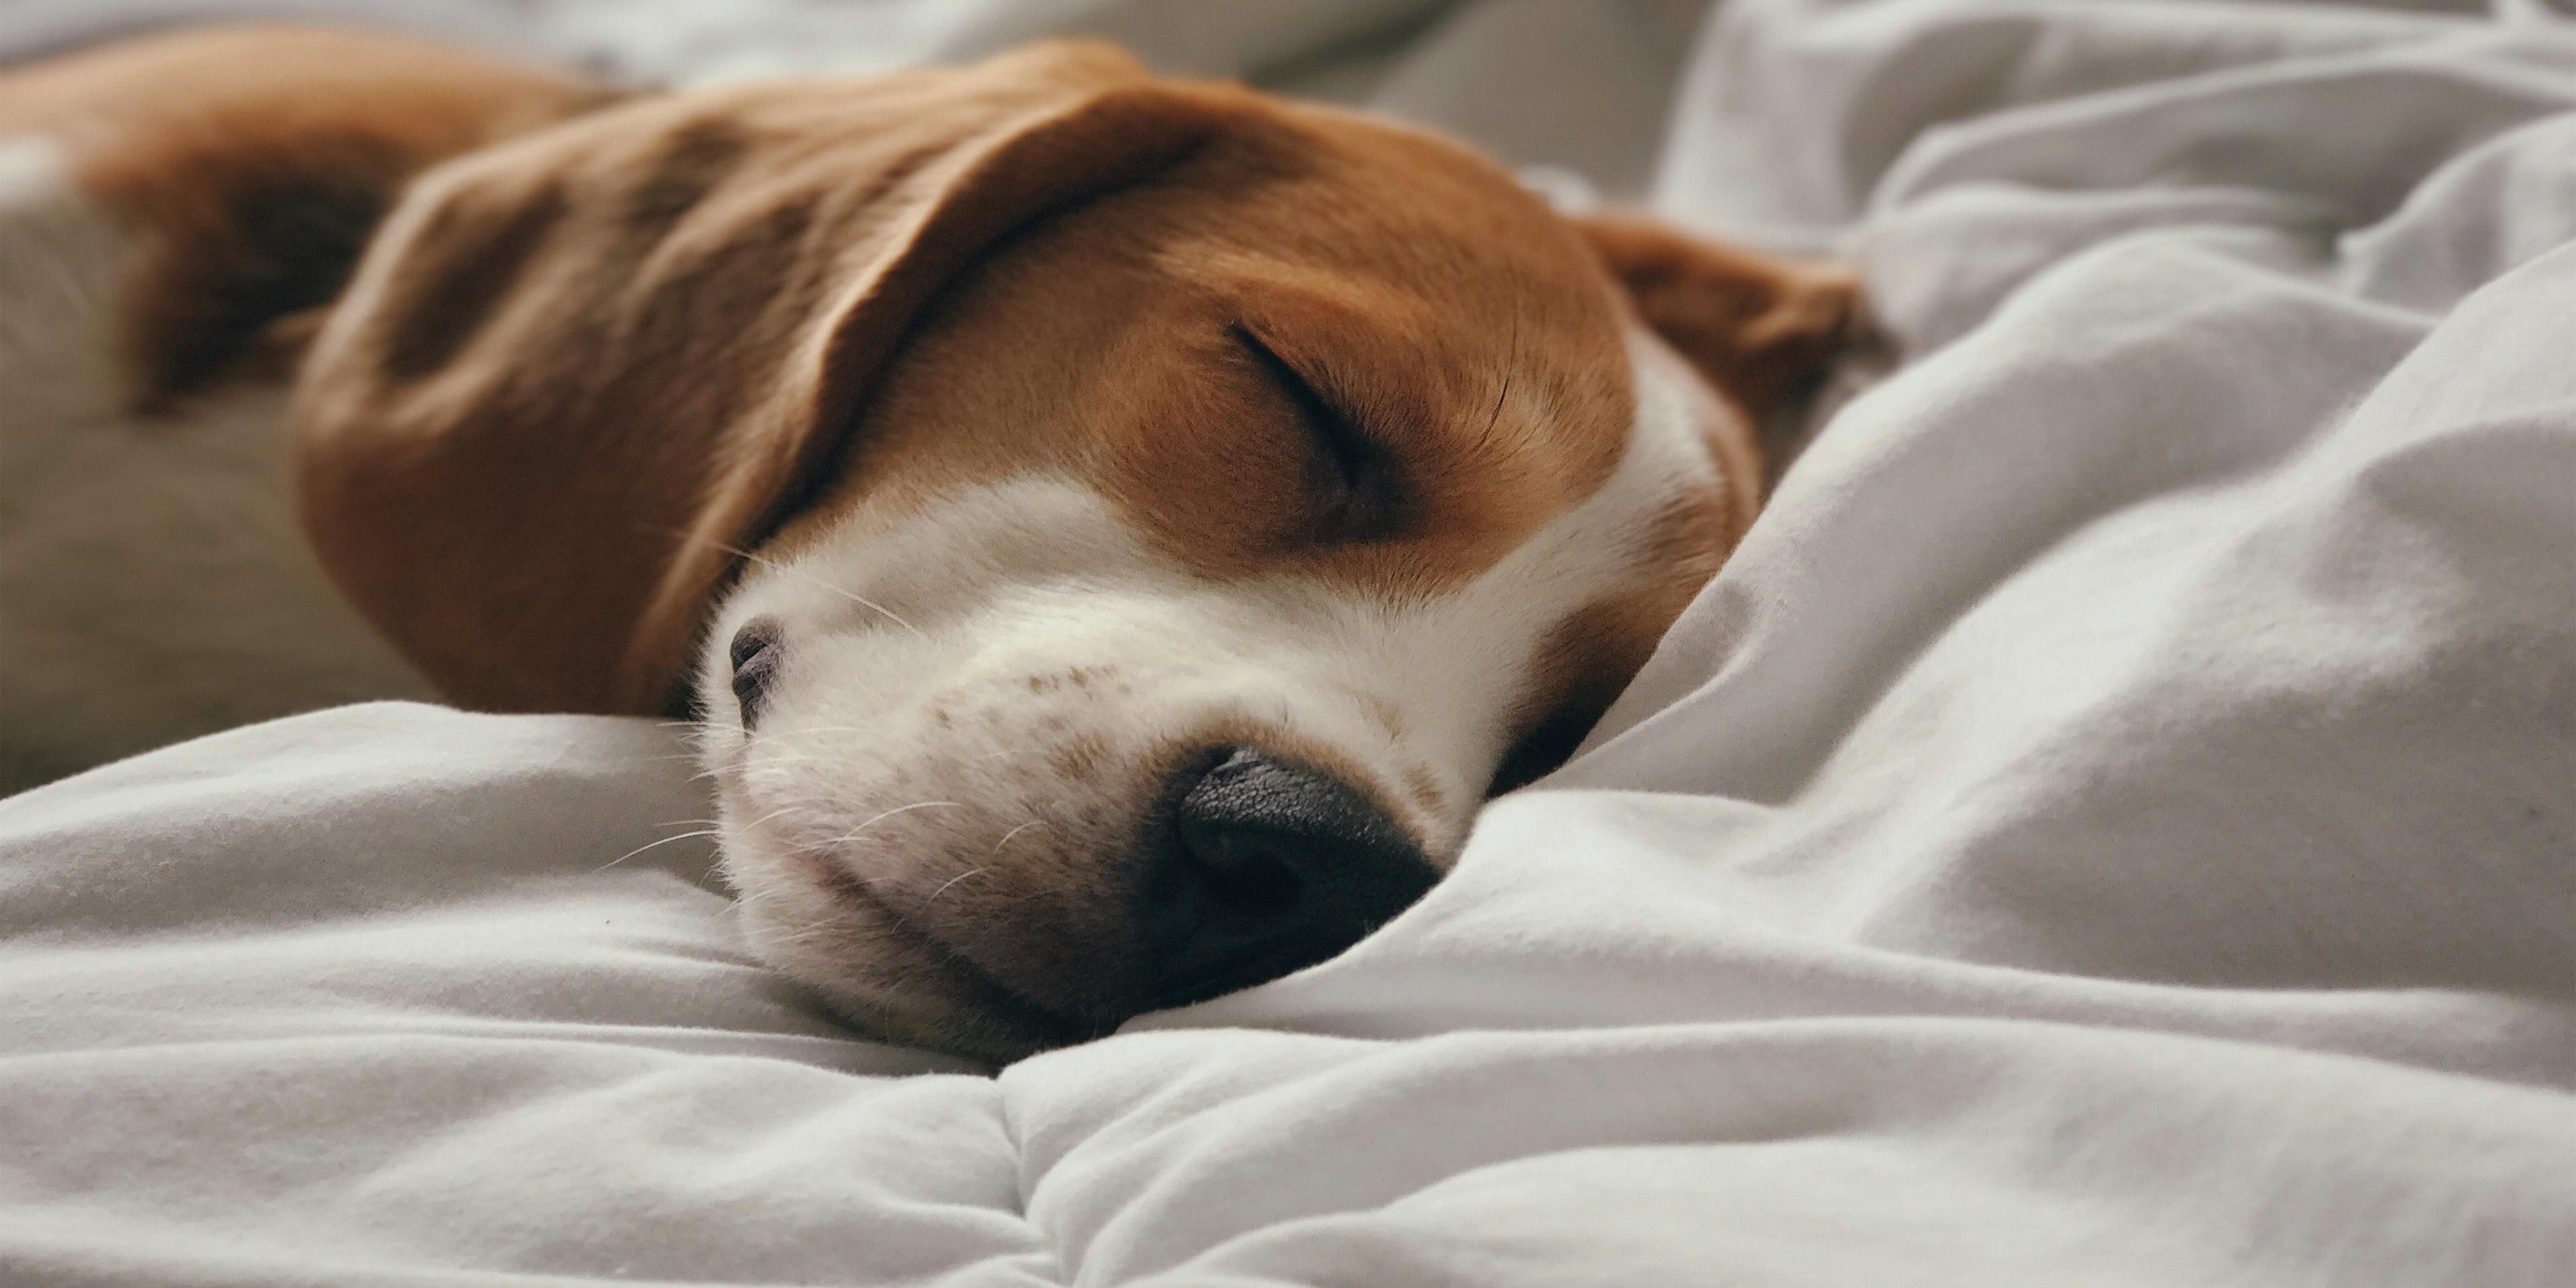 We offer pet friendly rooms so you don't have to leave your beloved pet behind! (20.00 per day pet fee).
